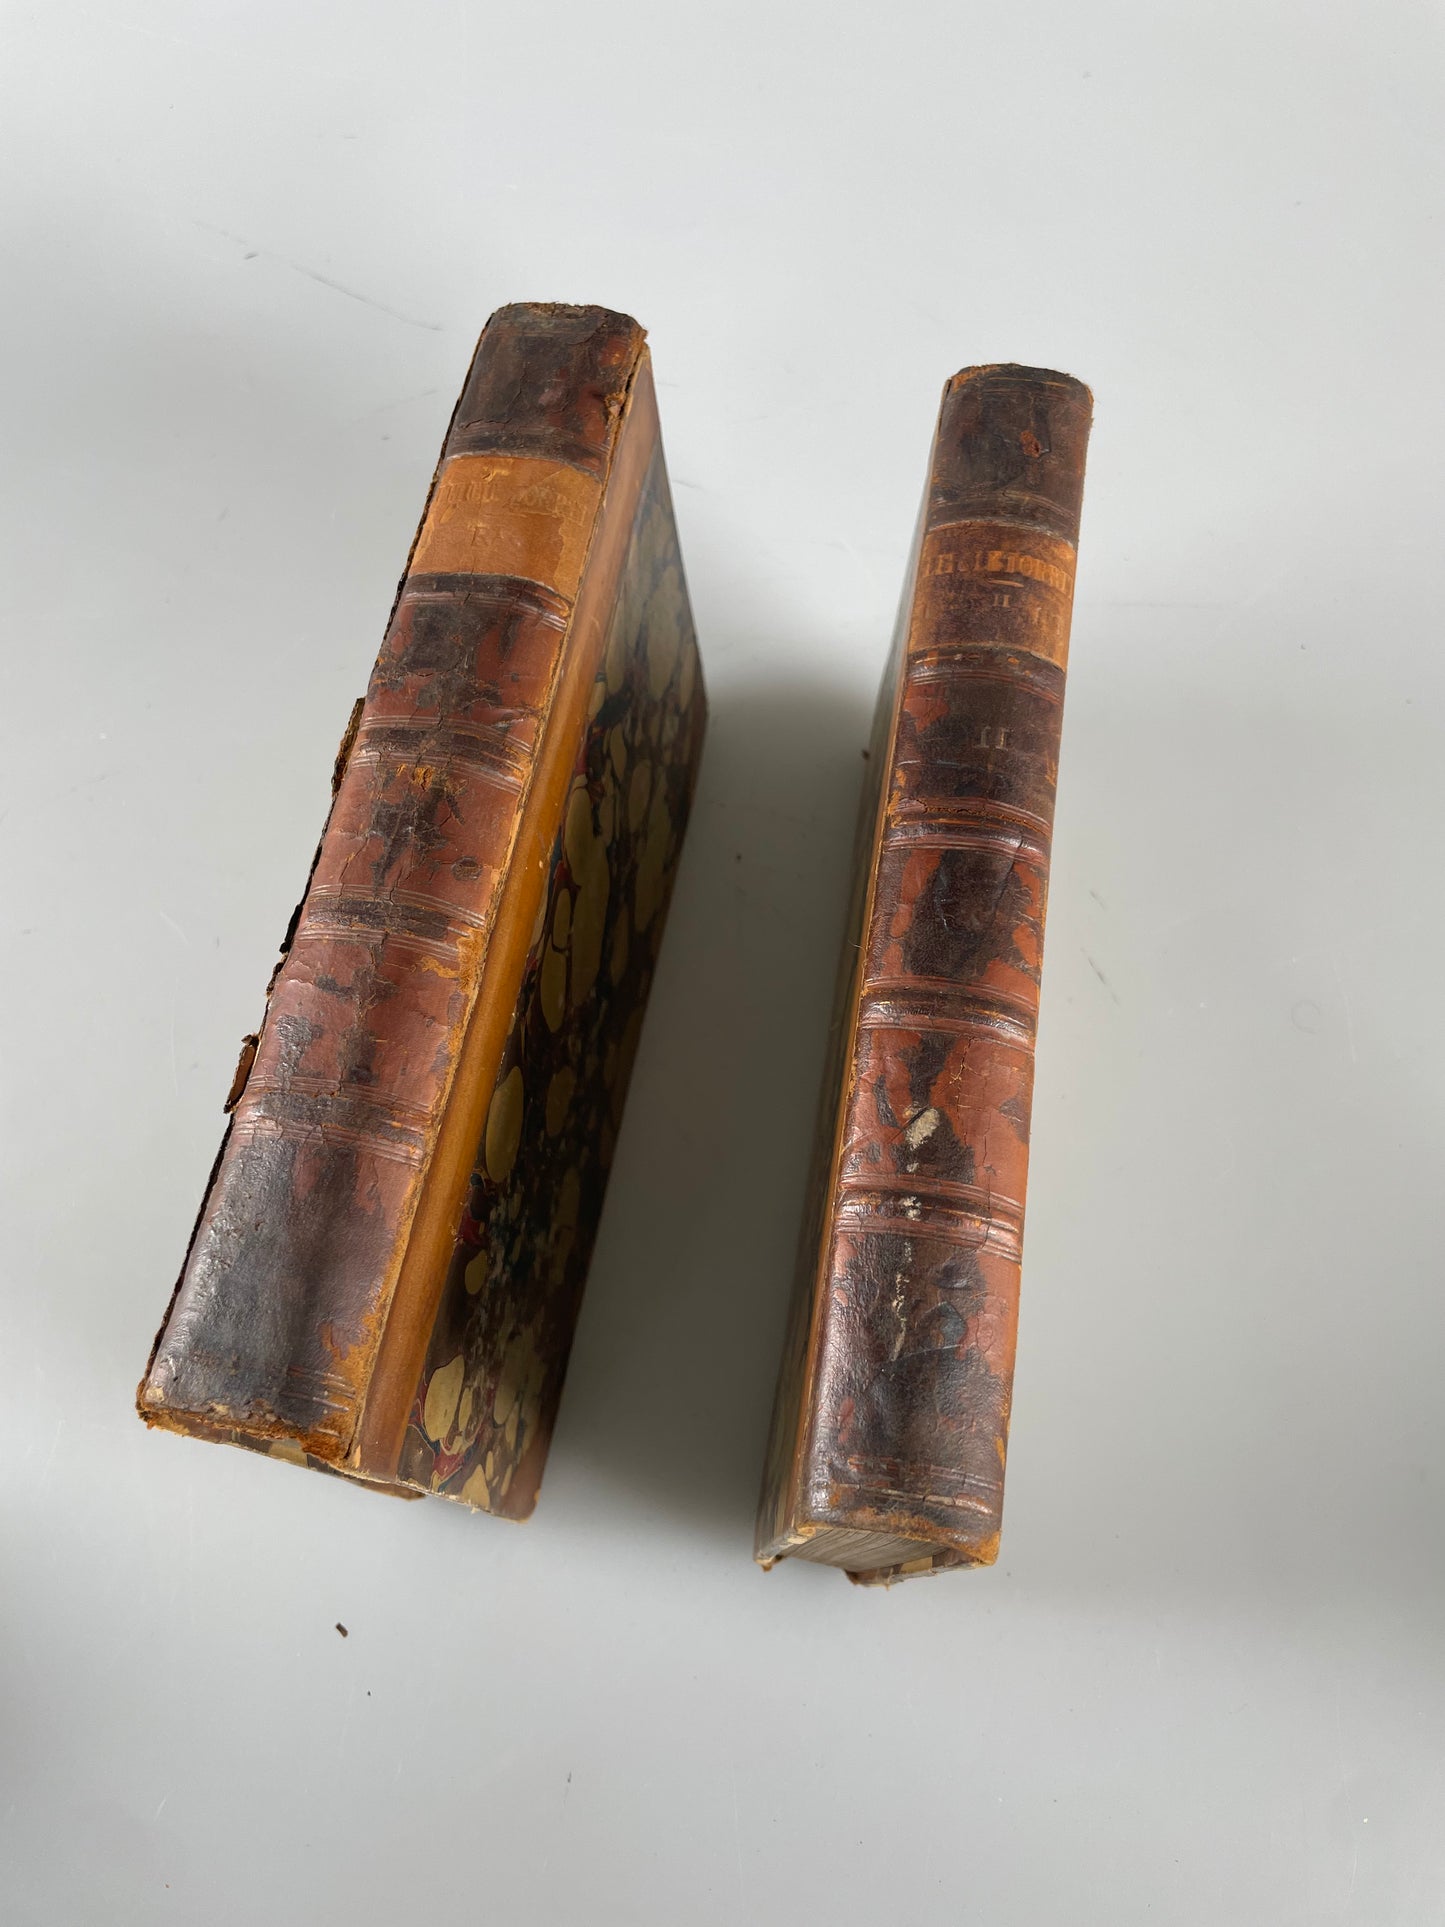 Little Dorrit in Two Volumes by Charles Dickens (1st Book Edition, 1857)